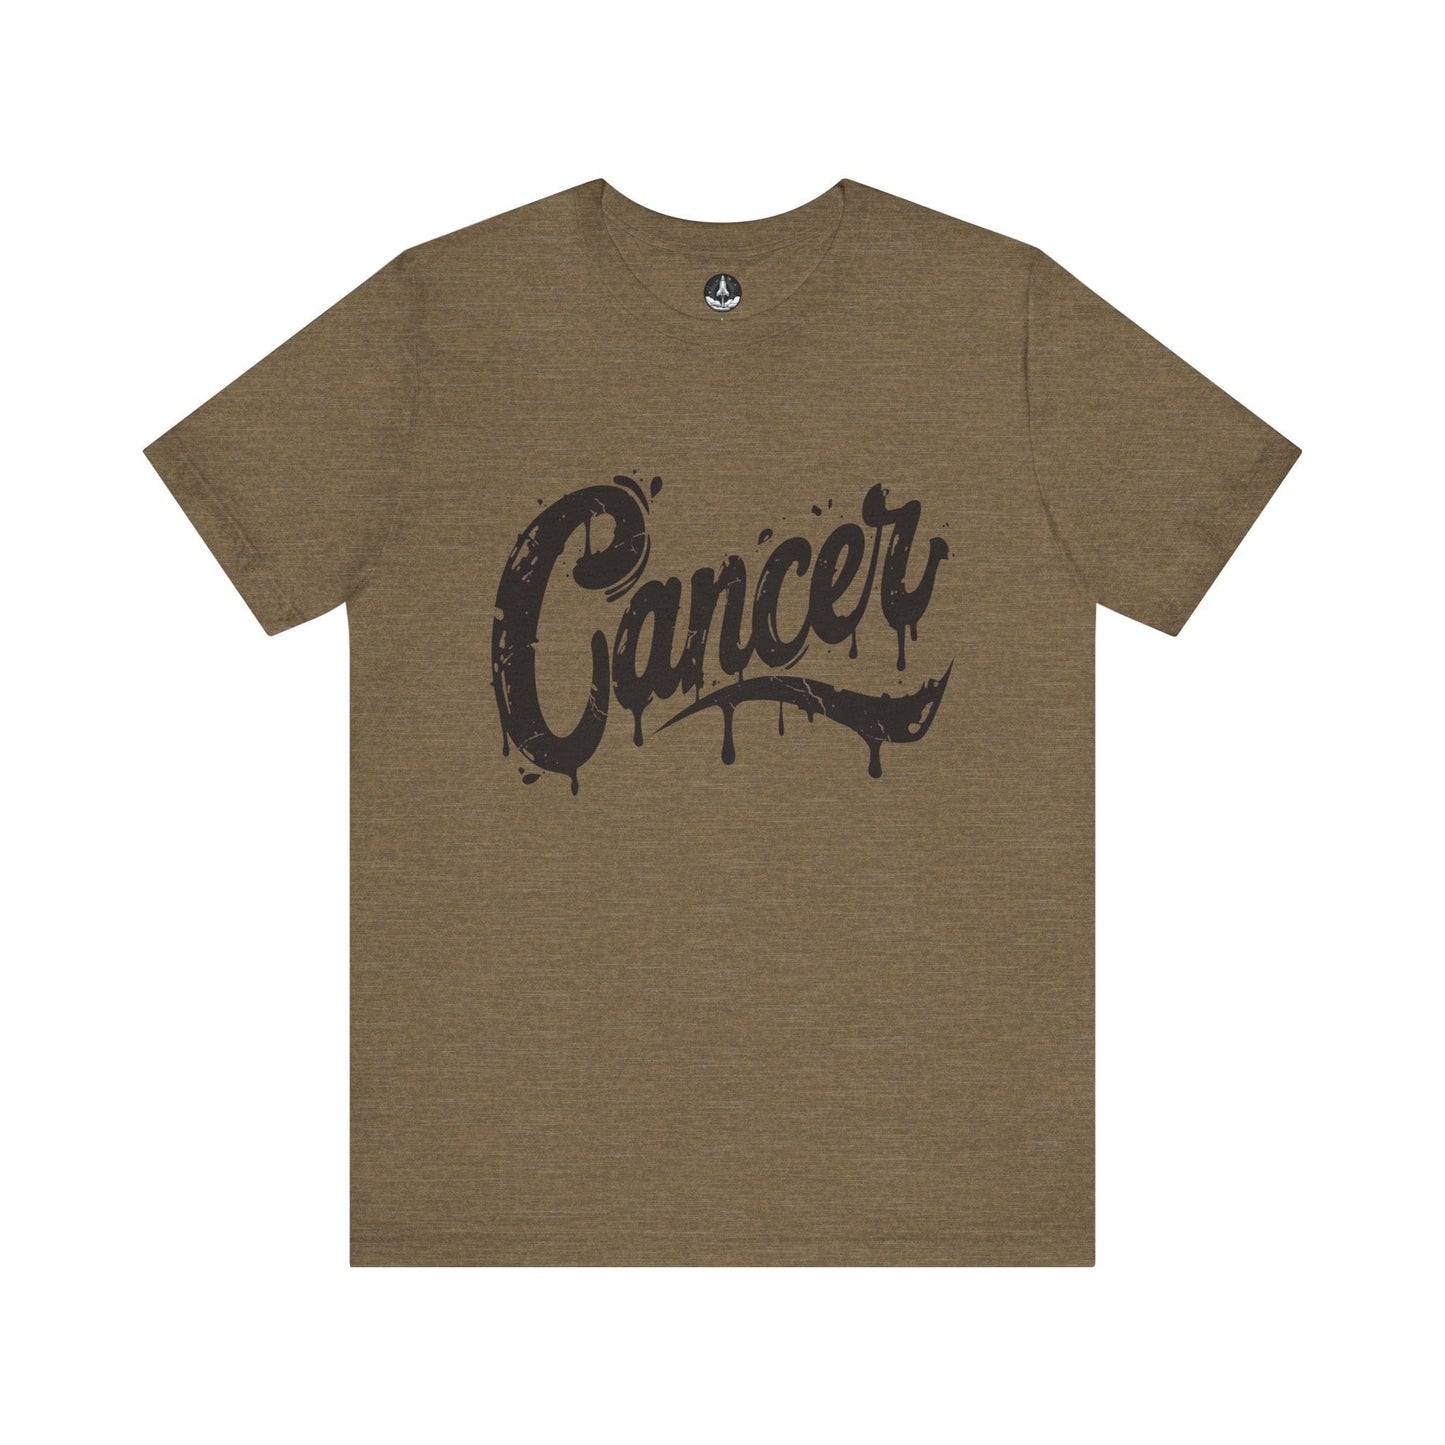 T-Shirt Heather Olive / S Tidal Emotion Cancer TShirt: Flow with Feeling